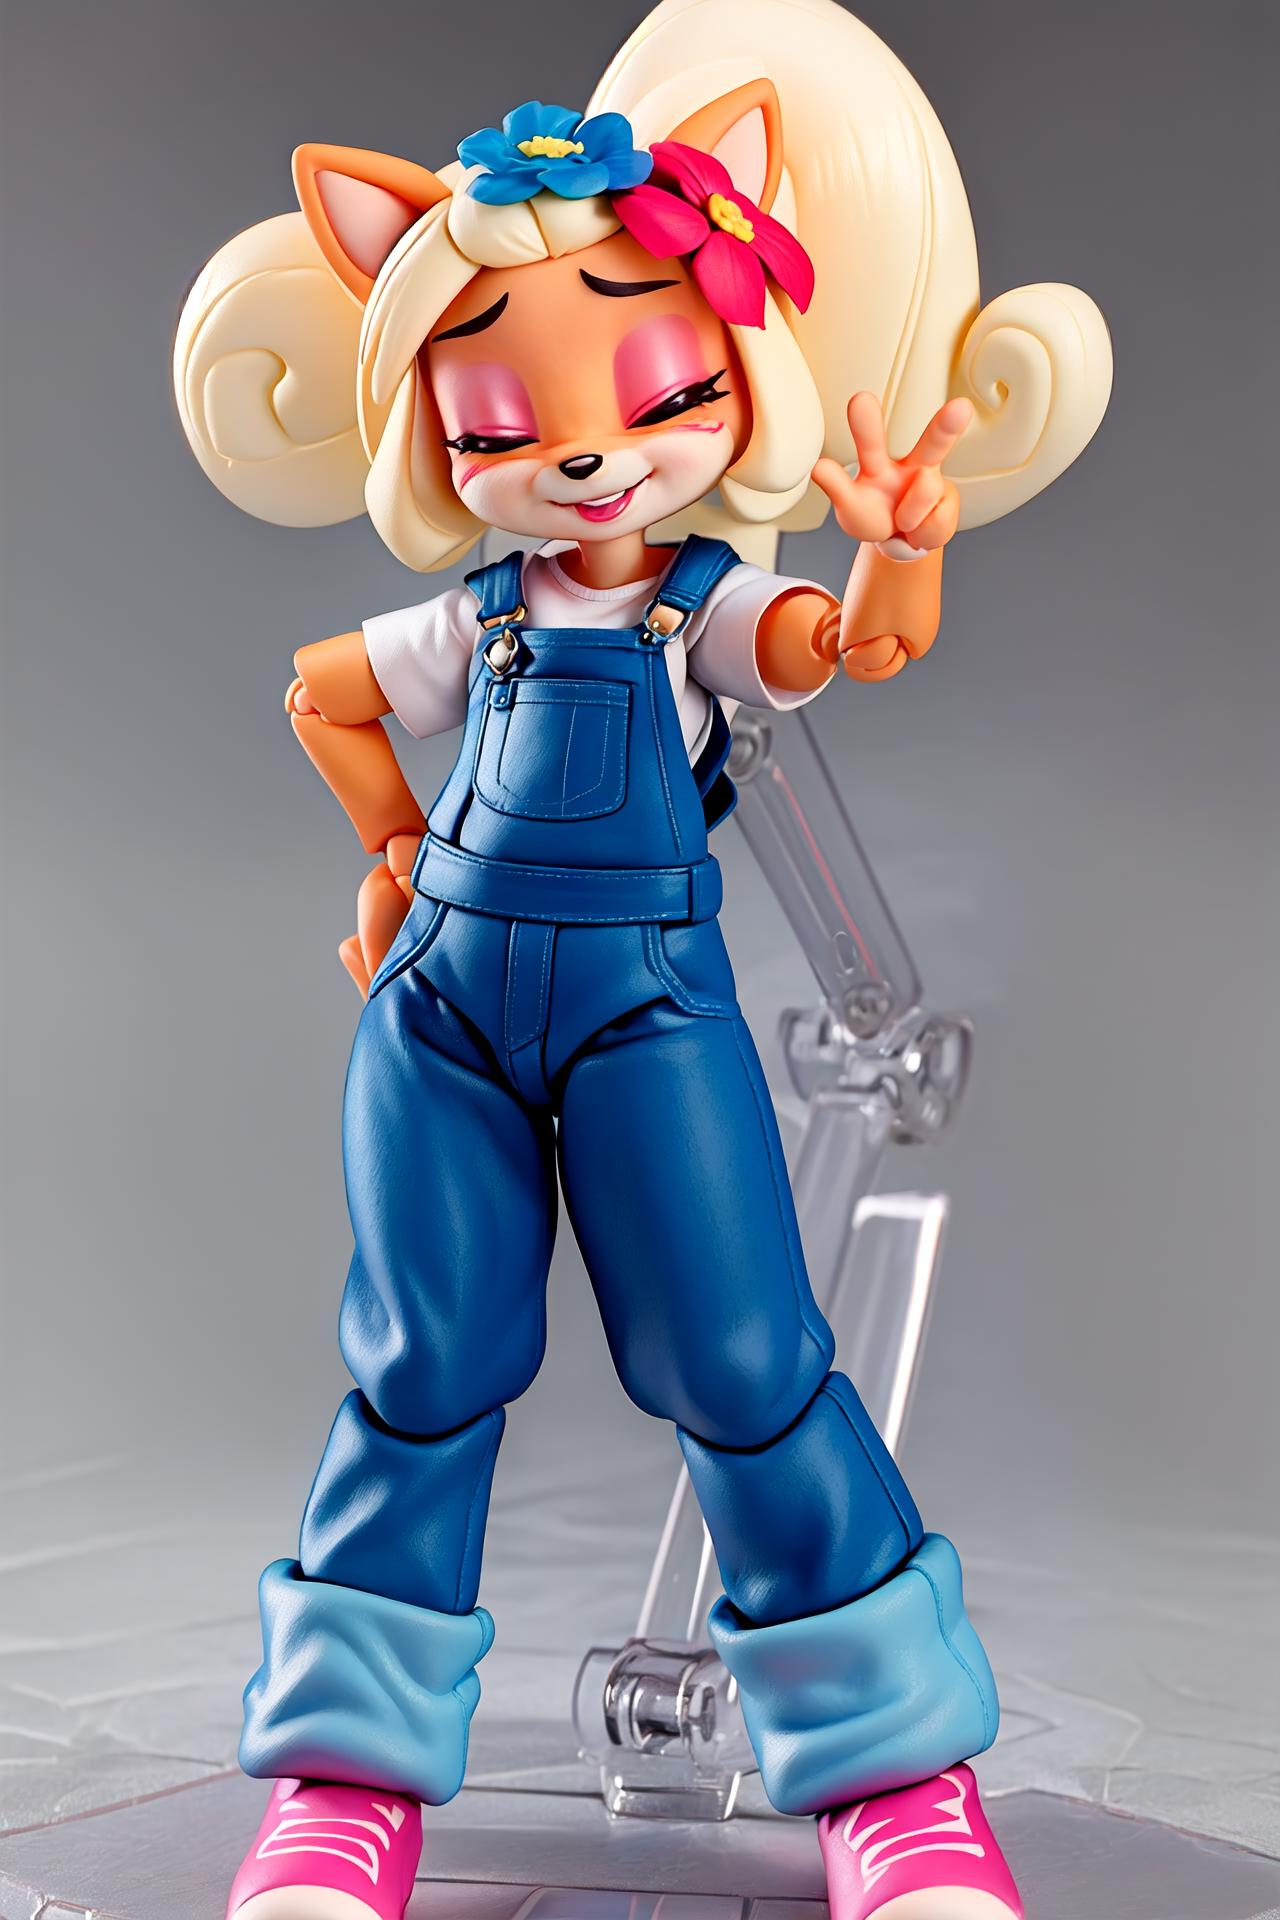 Coco Bandicoot LoRA image by Puffin